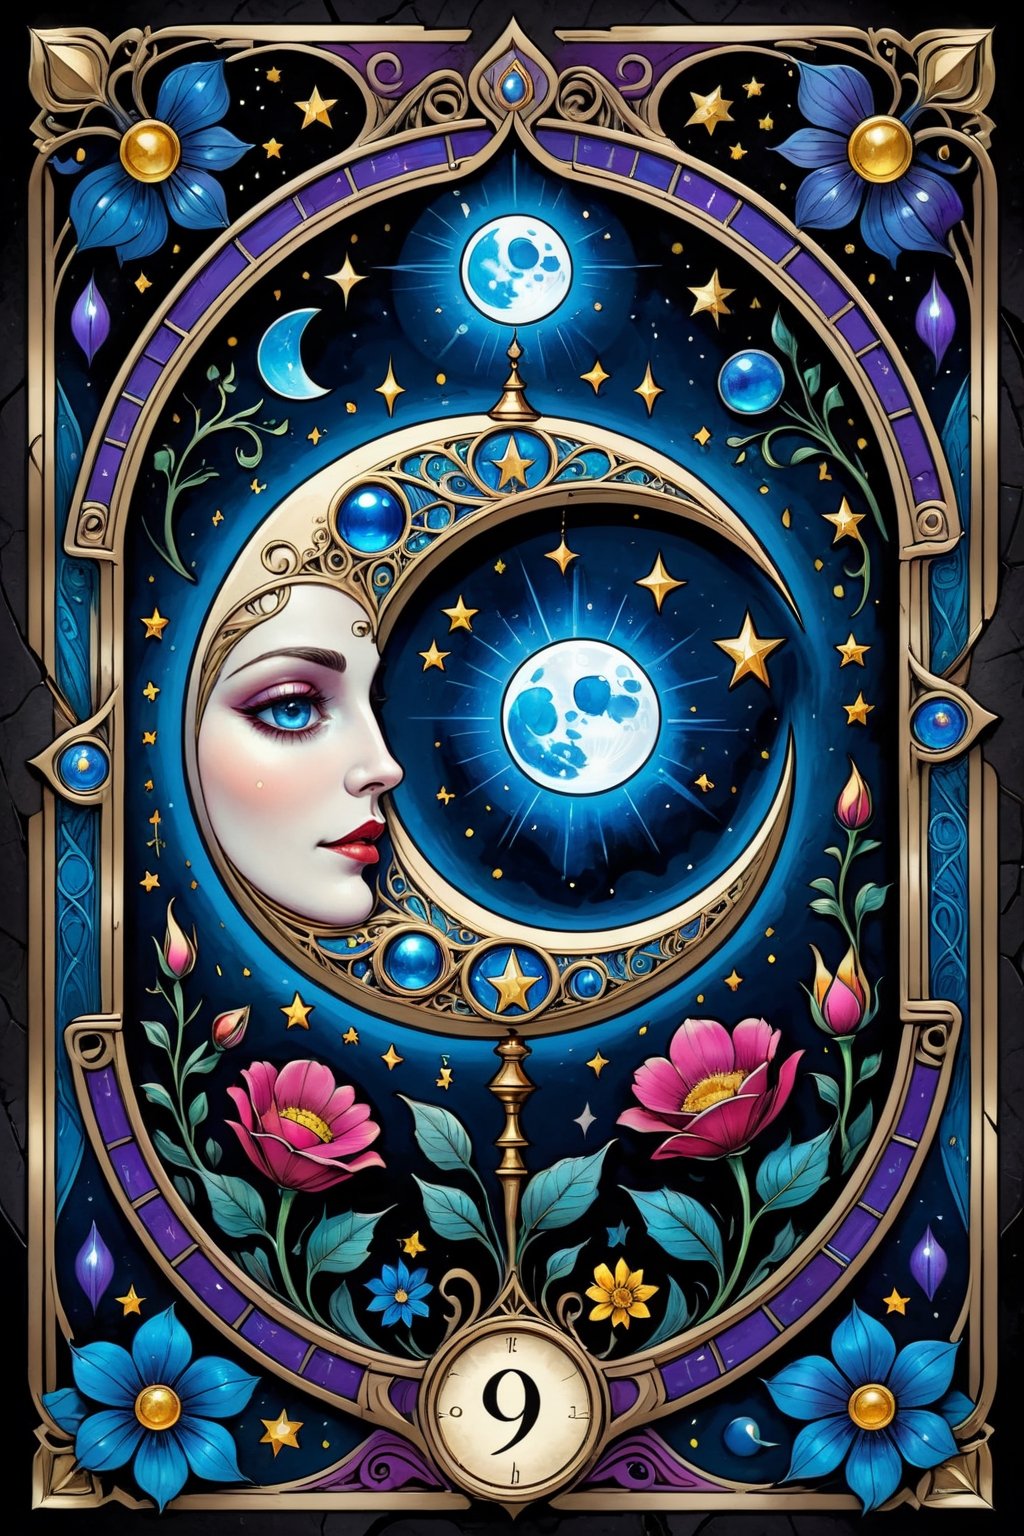 || Tarot card wit art deco frame, an ink drawing, a digital painting of The Moon, a bright rounded full moon with happy face over a starry blue sky, decorative flowers ||  pen and ink, liquid ink, best quality, double exposure, vintage triadic colors, realistic artstyle, stylized urban fantasy artwork, stunning digital illustration, stylized urban fantasy artwork, beautiful digital illustration, mysterious and detailed image, in the style of Craola, Dan Mumford, Andy Kehoe, 2d, flat, vintage, cracked paper art, patchwork, detailed storybook illustration, cinematic, ultra highly detailed, mystical, luminism, vibrant colors, complex background,tarot card,comic book,on parchment,aw0k straightsylum, pen and ink, liquid ink, best quality, double exposure, vintage triadic colors, (tarot card:1.2), realistic artstyle, stylized urban fantasy artwork, stunning digital illustration, stylized urban fantasy artwork, beautiful digital illustration, mysterious and detailed image, in the style of Craola, Dan Mumford, Andy Kehoe, 2d, flat, vintage, cracked paper art, patchwork, detailed storybook illustration, cinematic, ultra highly detailed, mystical, luminism, vibrant colors, complex background,tarot card,comic book,on parchment